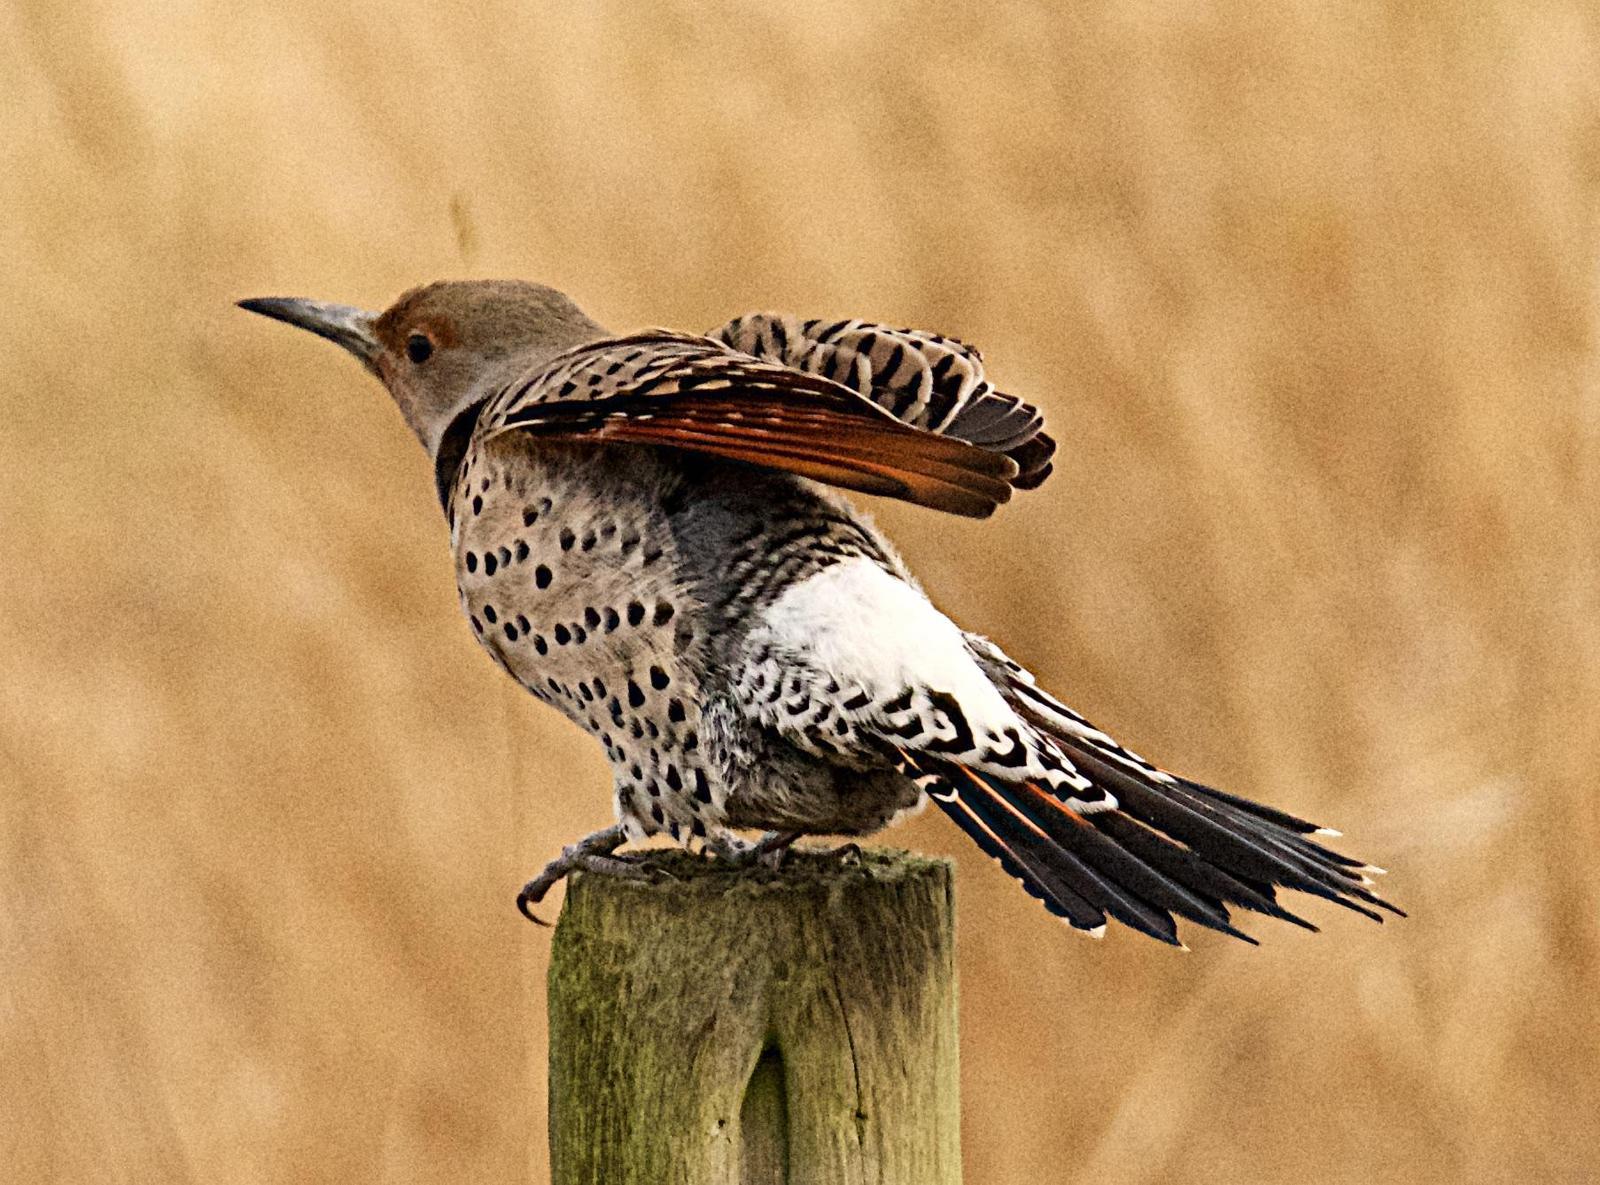 Northern Flicker (Red-shafted) Photo by Brian Avent